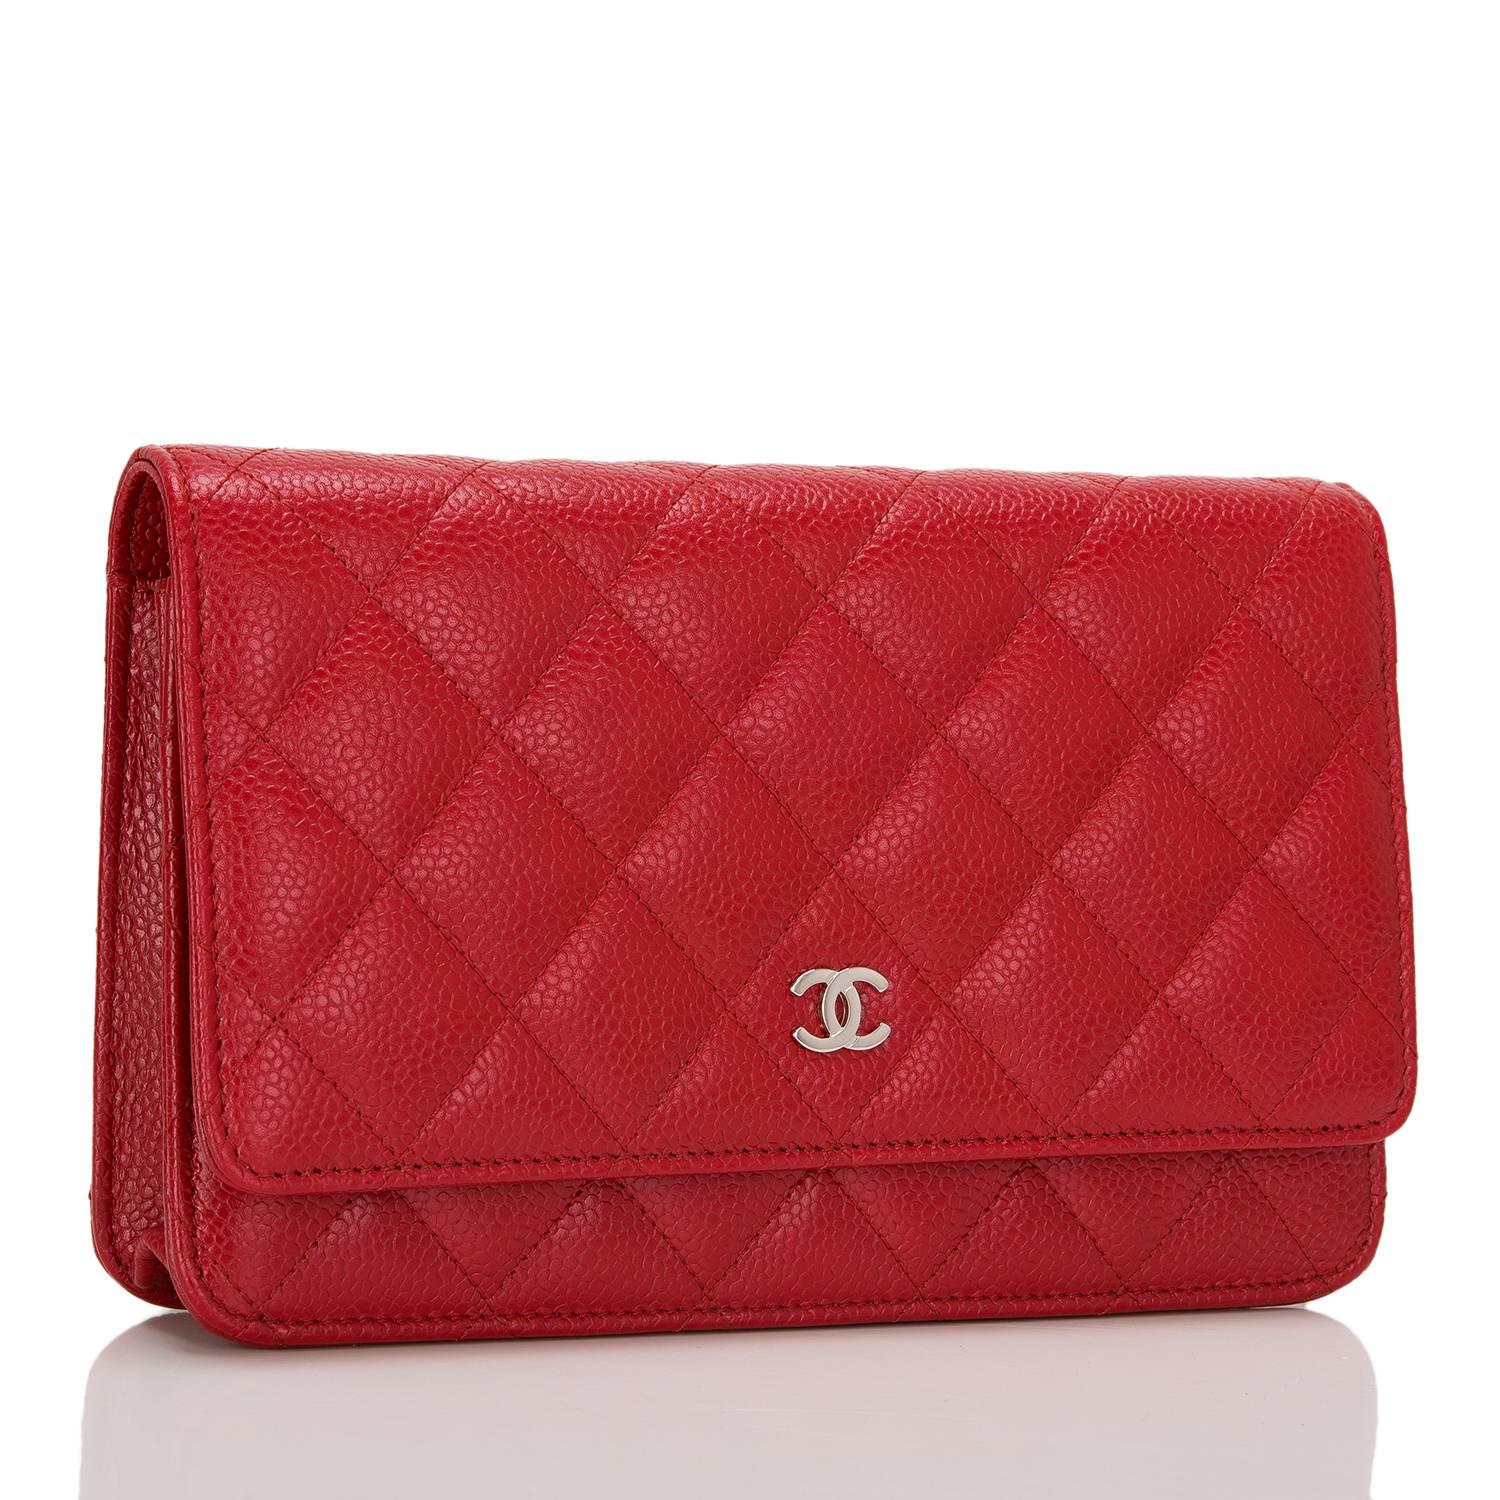 Chanel Classic Wallet On Chain (WOC) of red caviar leather with silver tone hardware.

This Wallet On Chain features signature Chanel quilting, a front flap with CC charm and hidden snap closure, a half moon rear pocket, and an interwoven silver